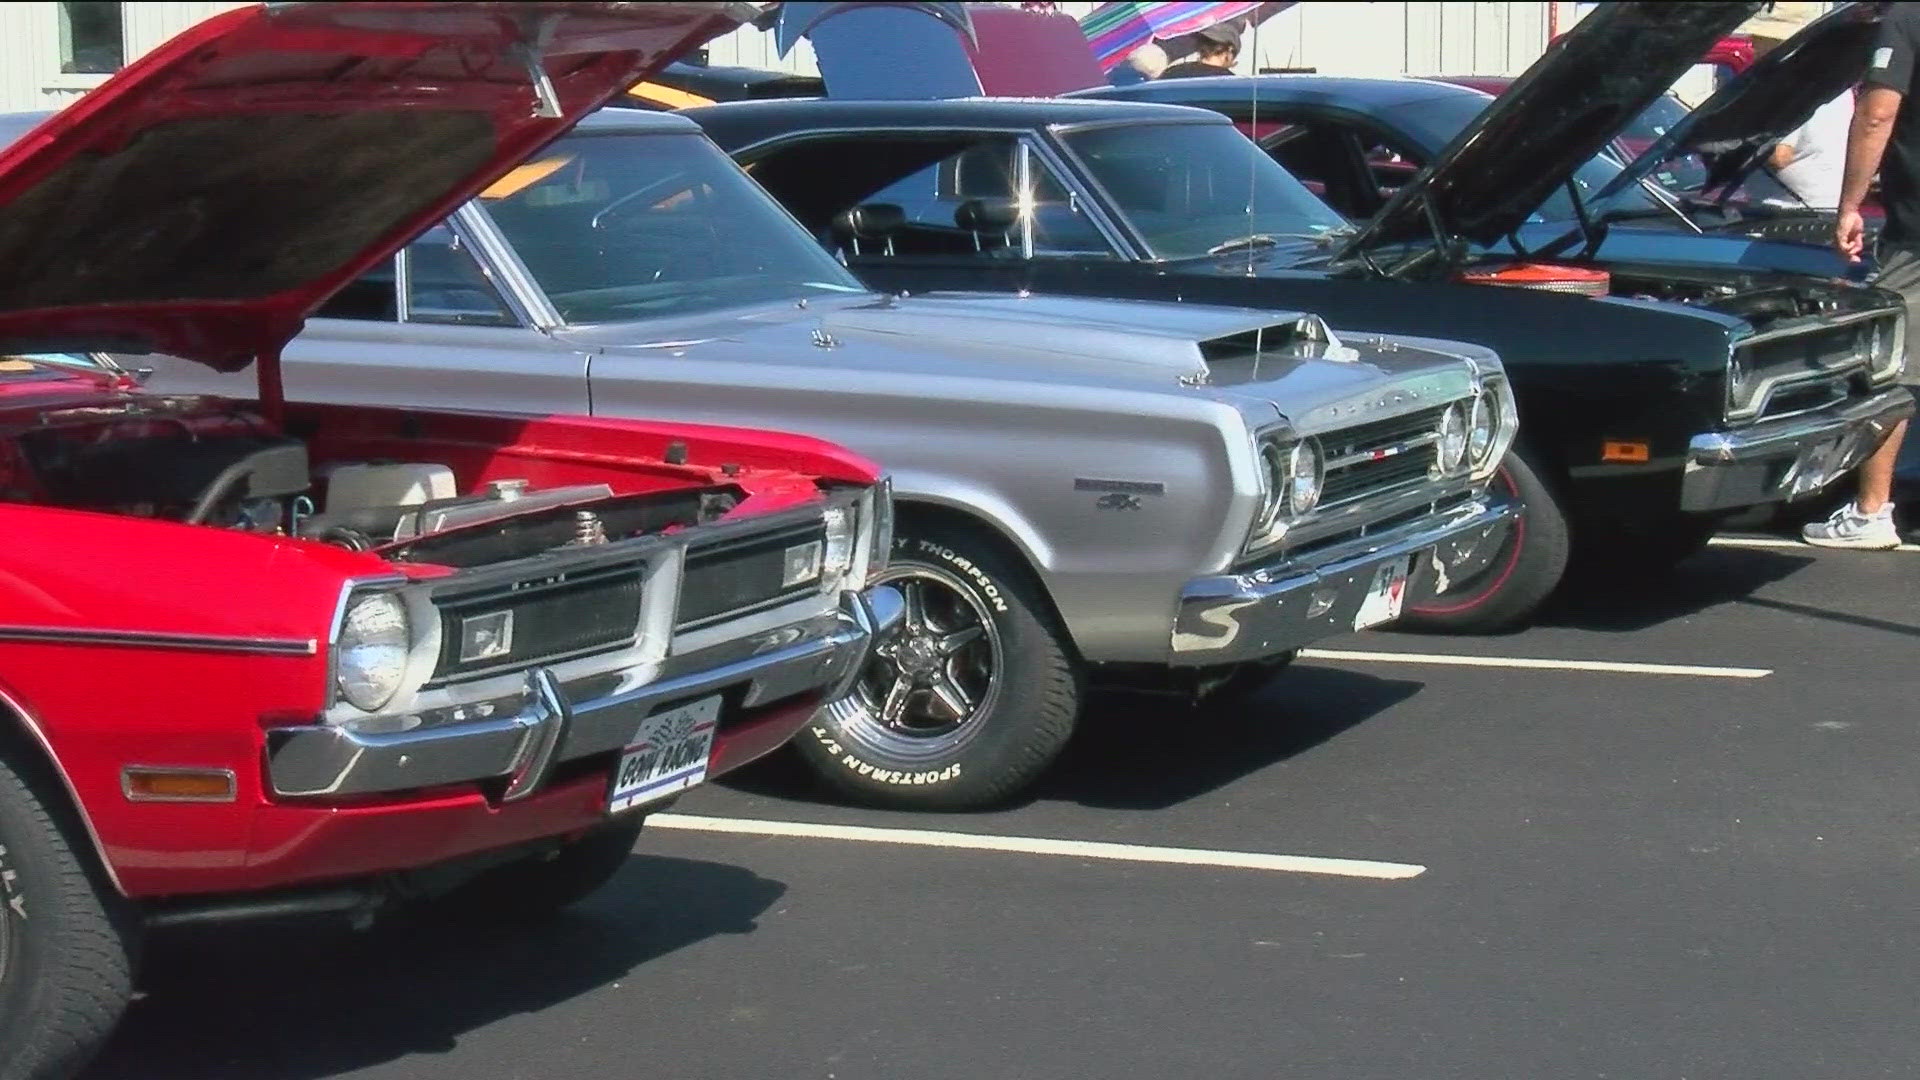 After a hiatus of over 10 years, three Wendy's locations in Perrysburg, Bowling Green and Fostoria will host the classic car shows each month from May through July.